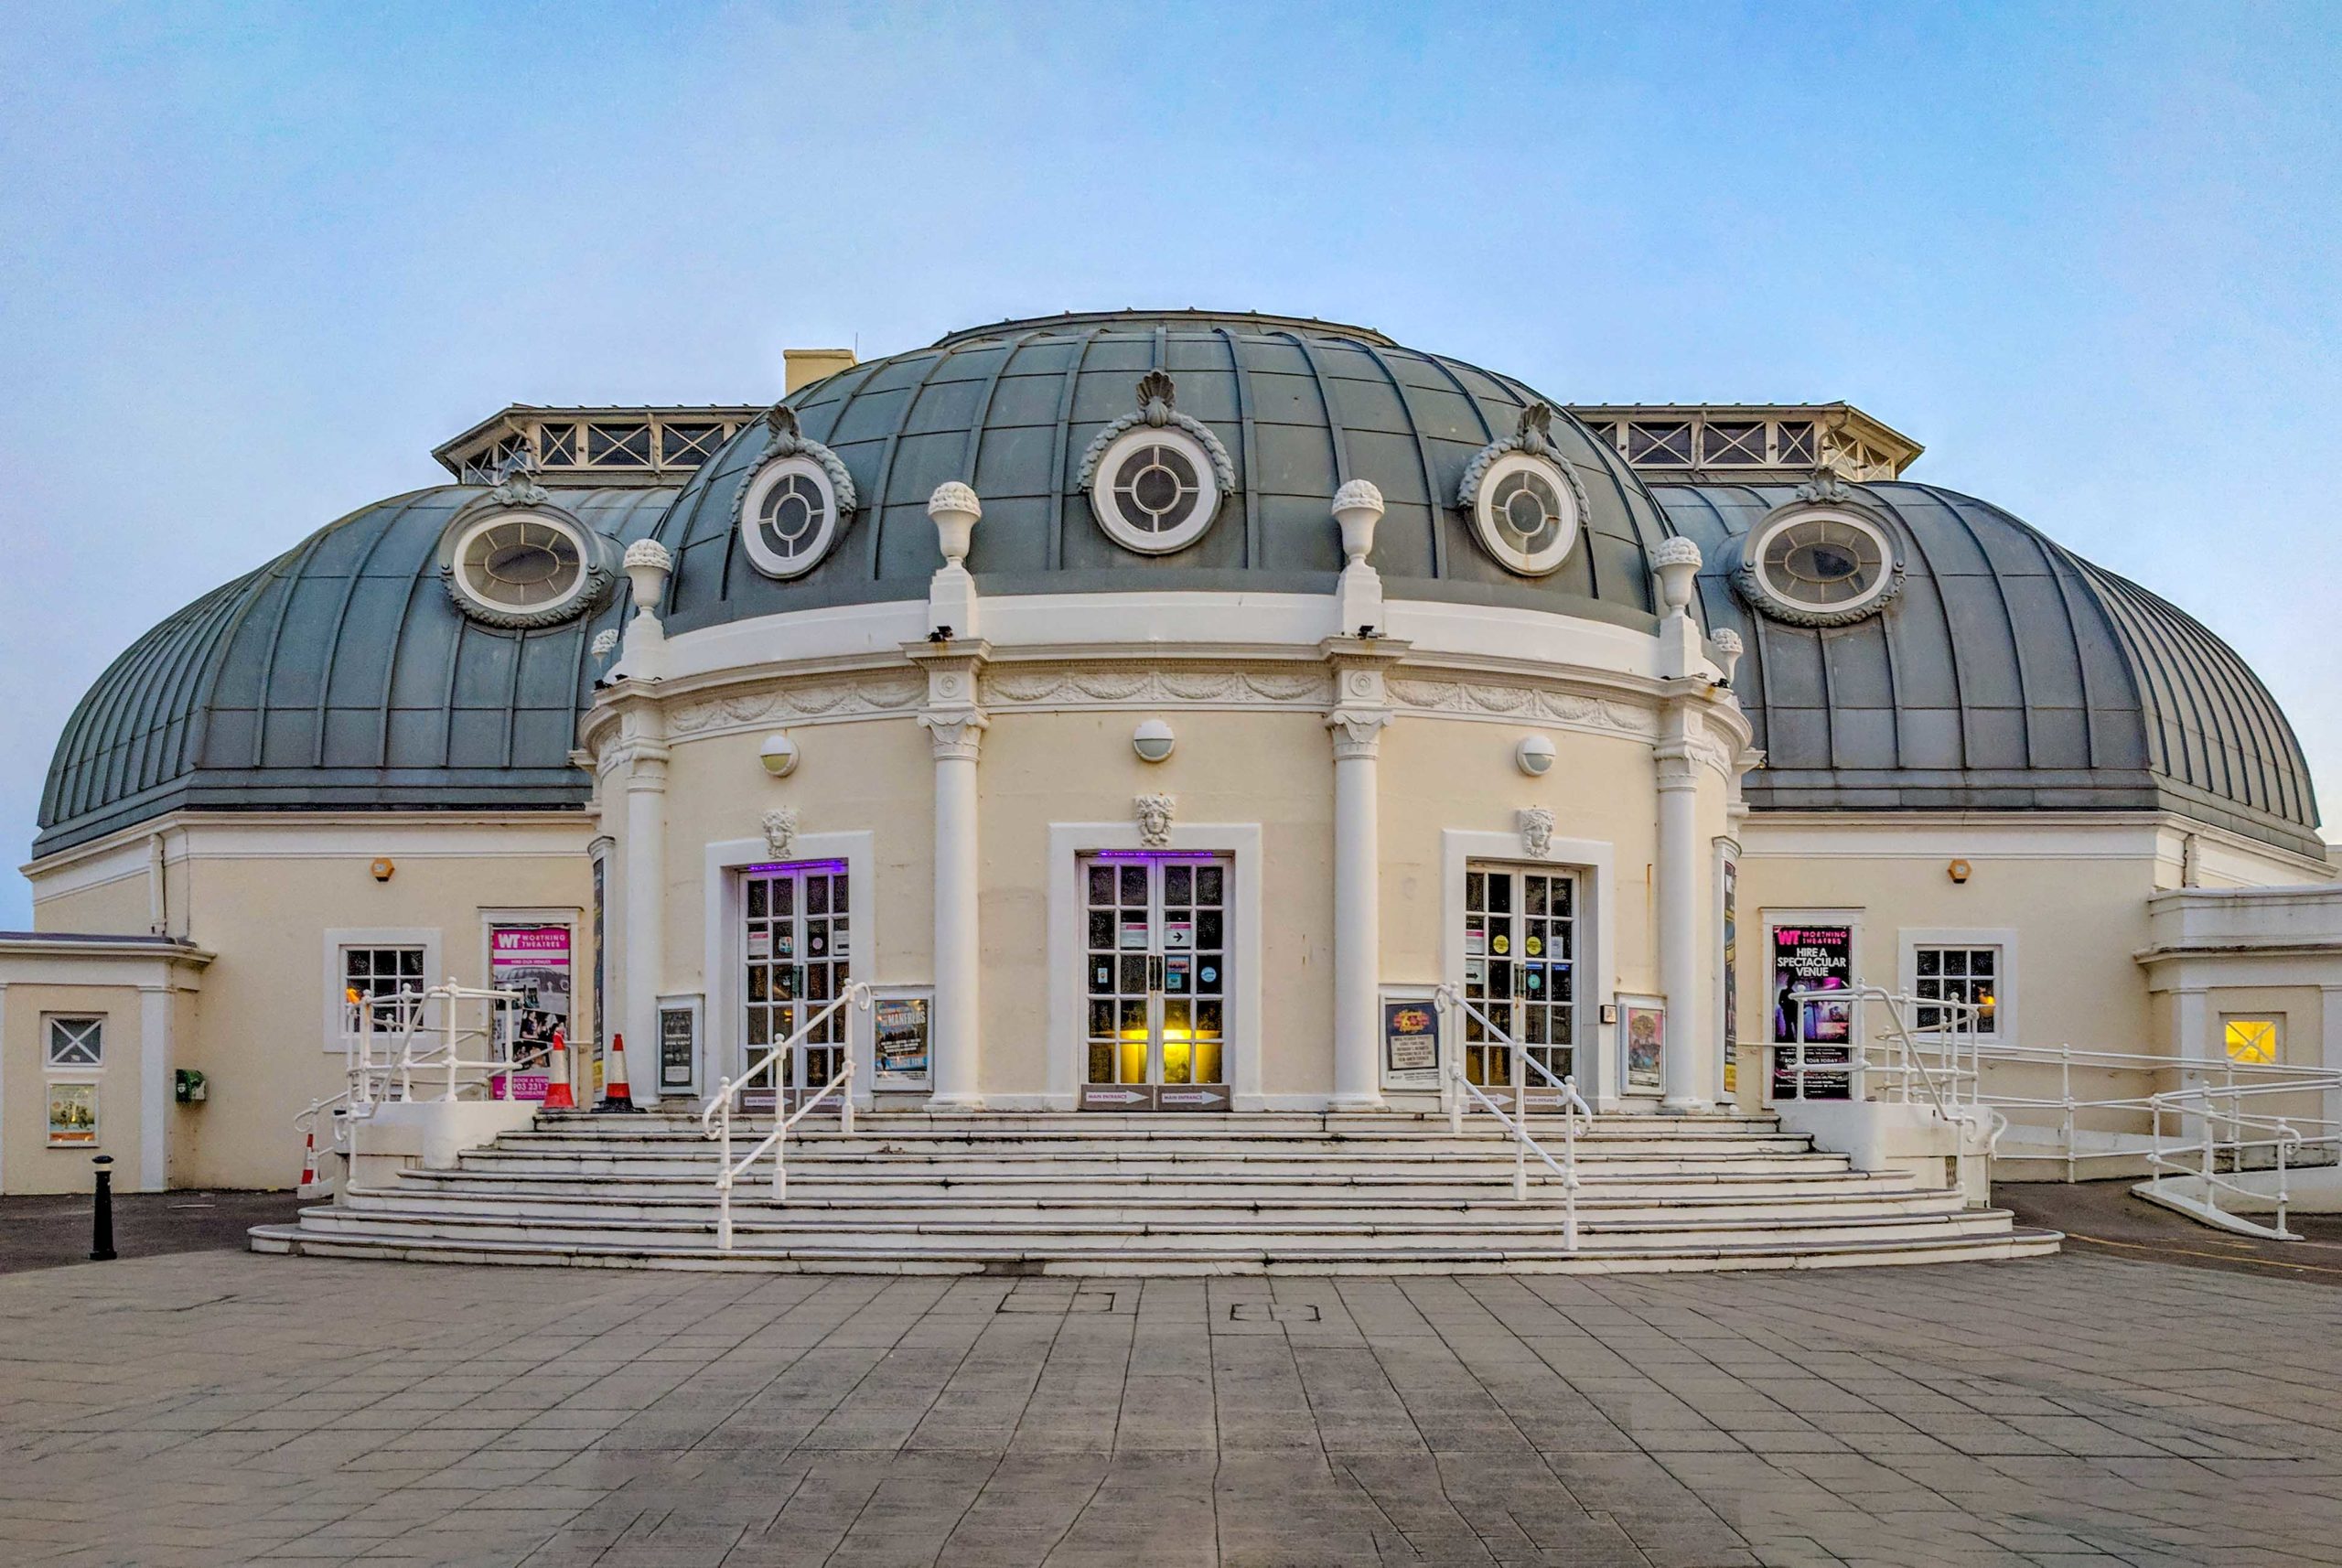 Worthing Pier Pavilion Theatre © The wub - licence [CC BY-SA 4.0] from Wikimedia Commons